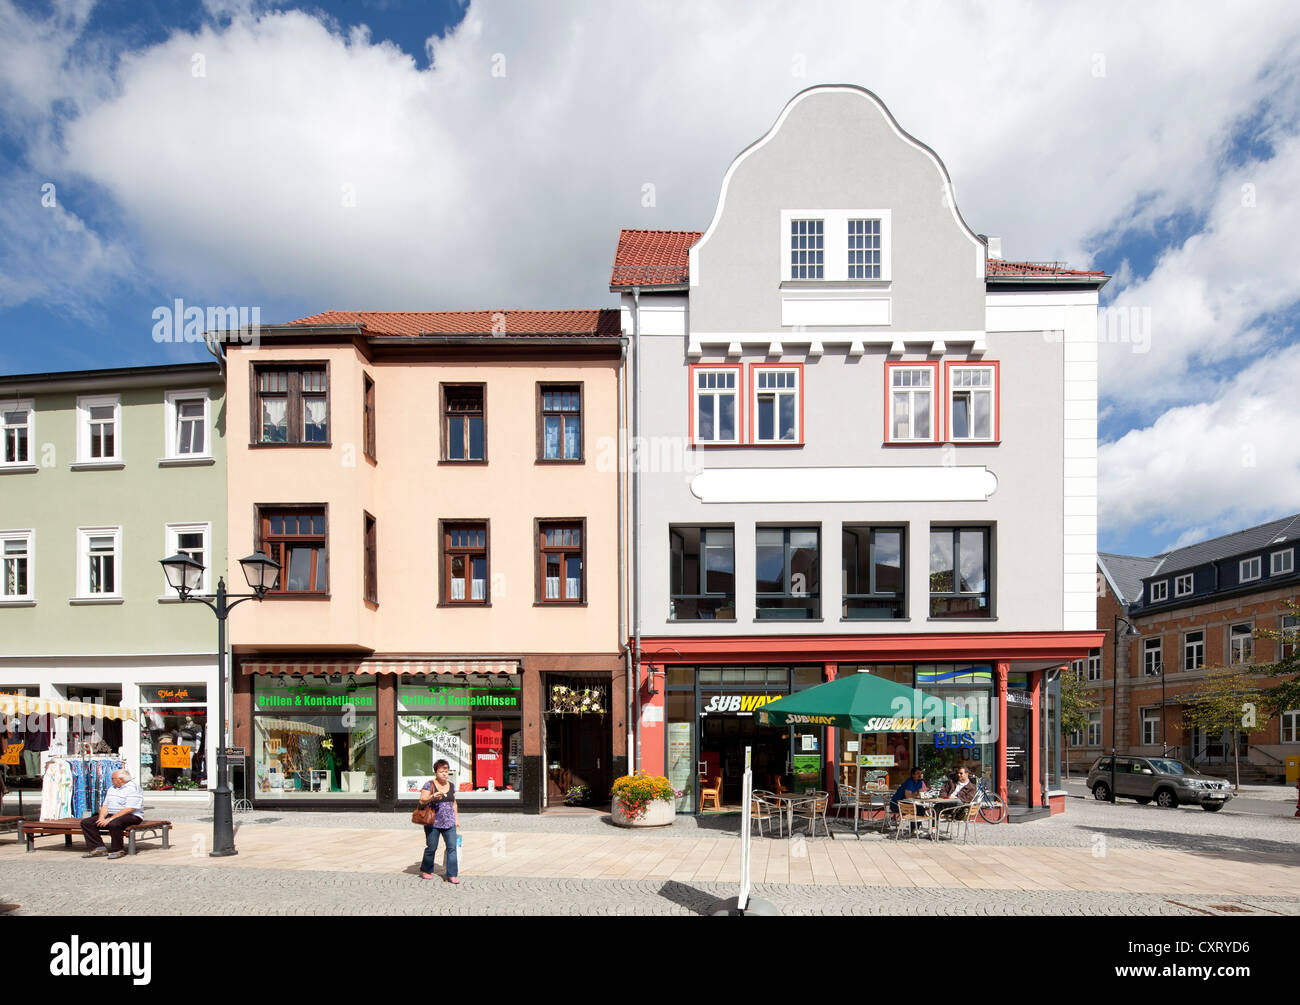 Commercial buildings in Poststrasse, Ilmenau, Thuringia, Germany, Europe, PublicGround Stock Photo